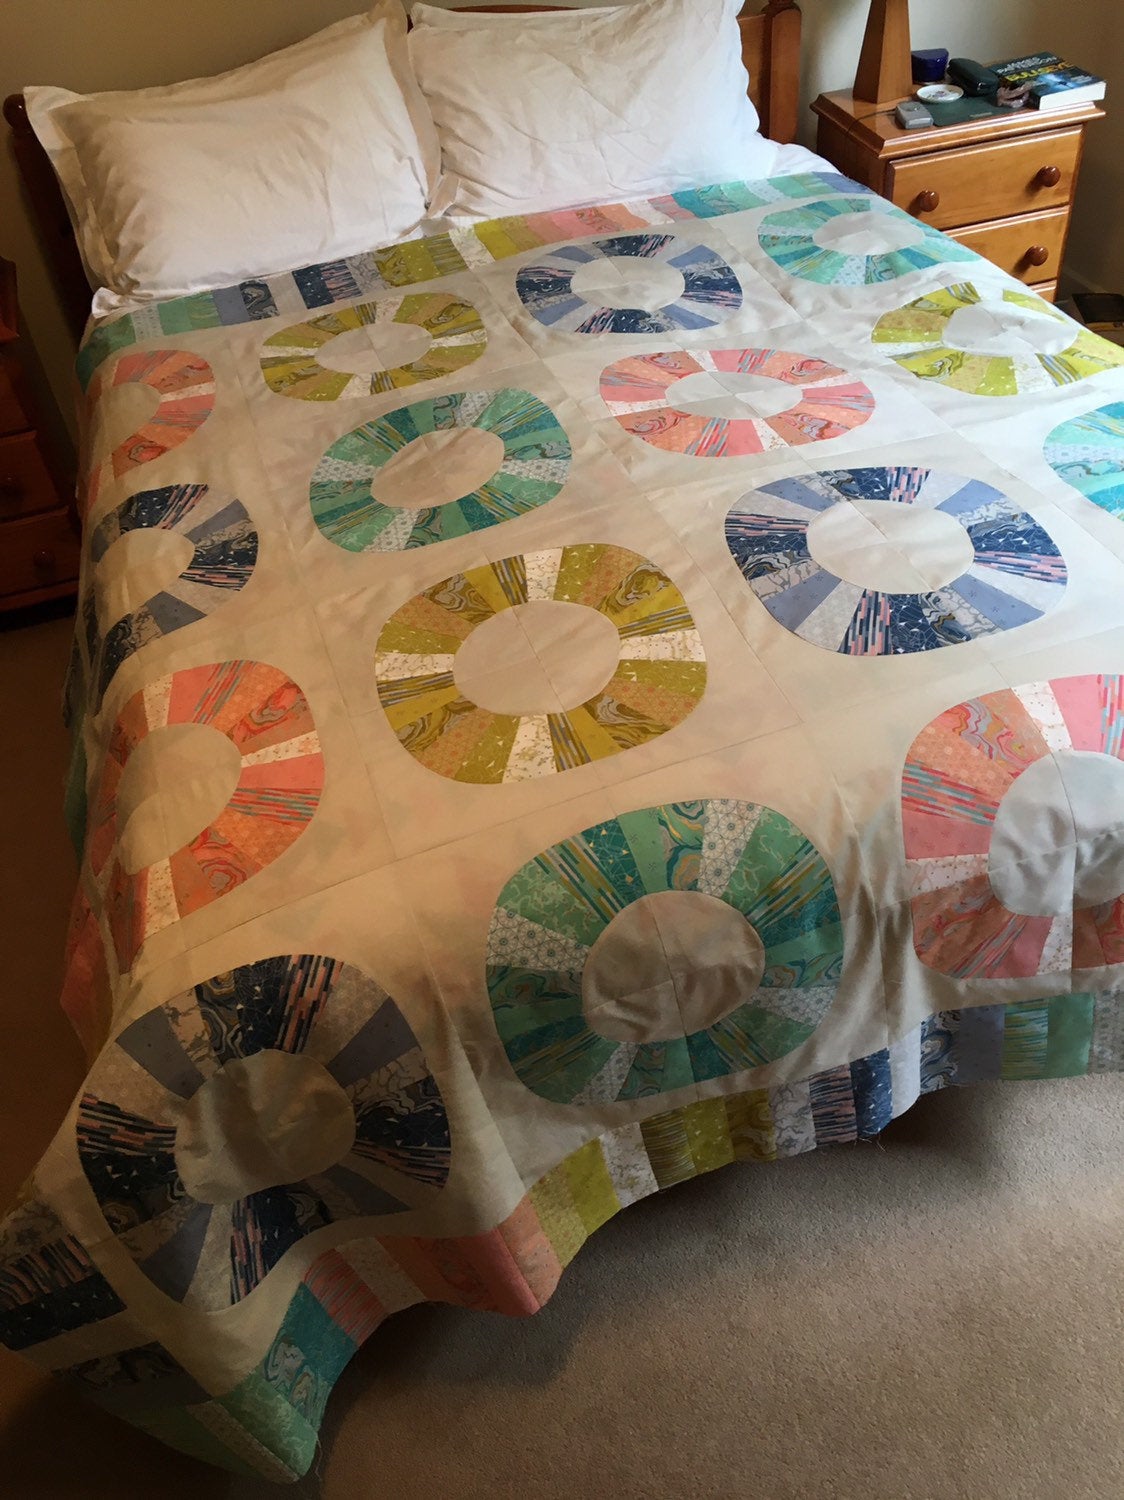 Wheels of Fortune Quilt Pattern - PDF